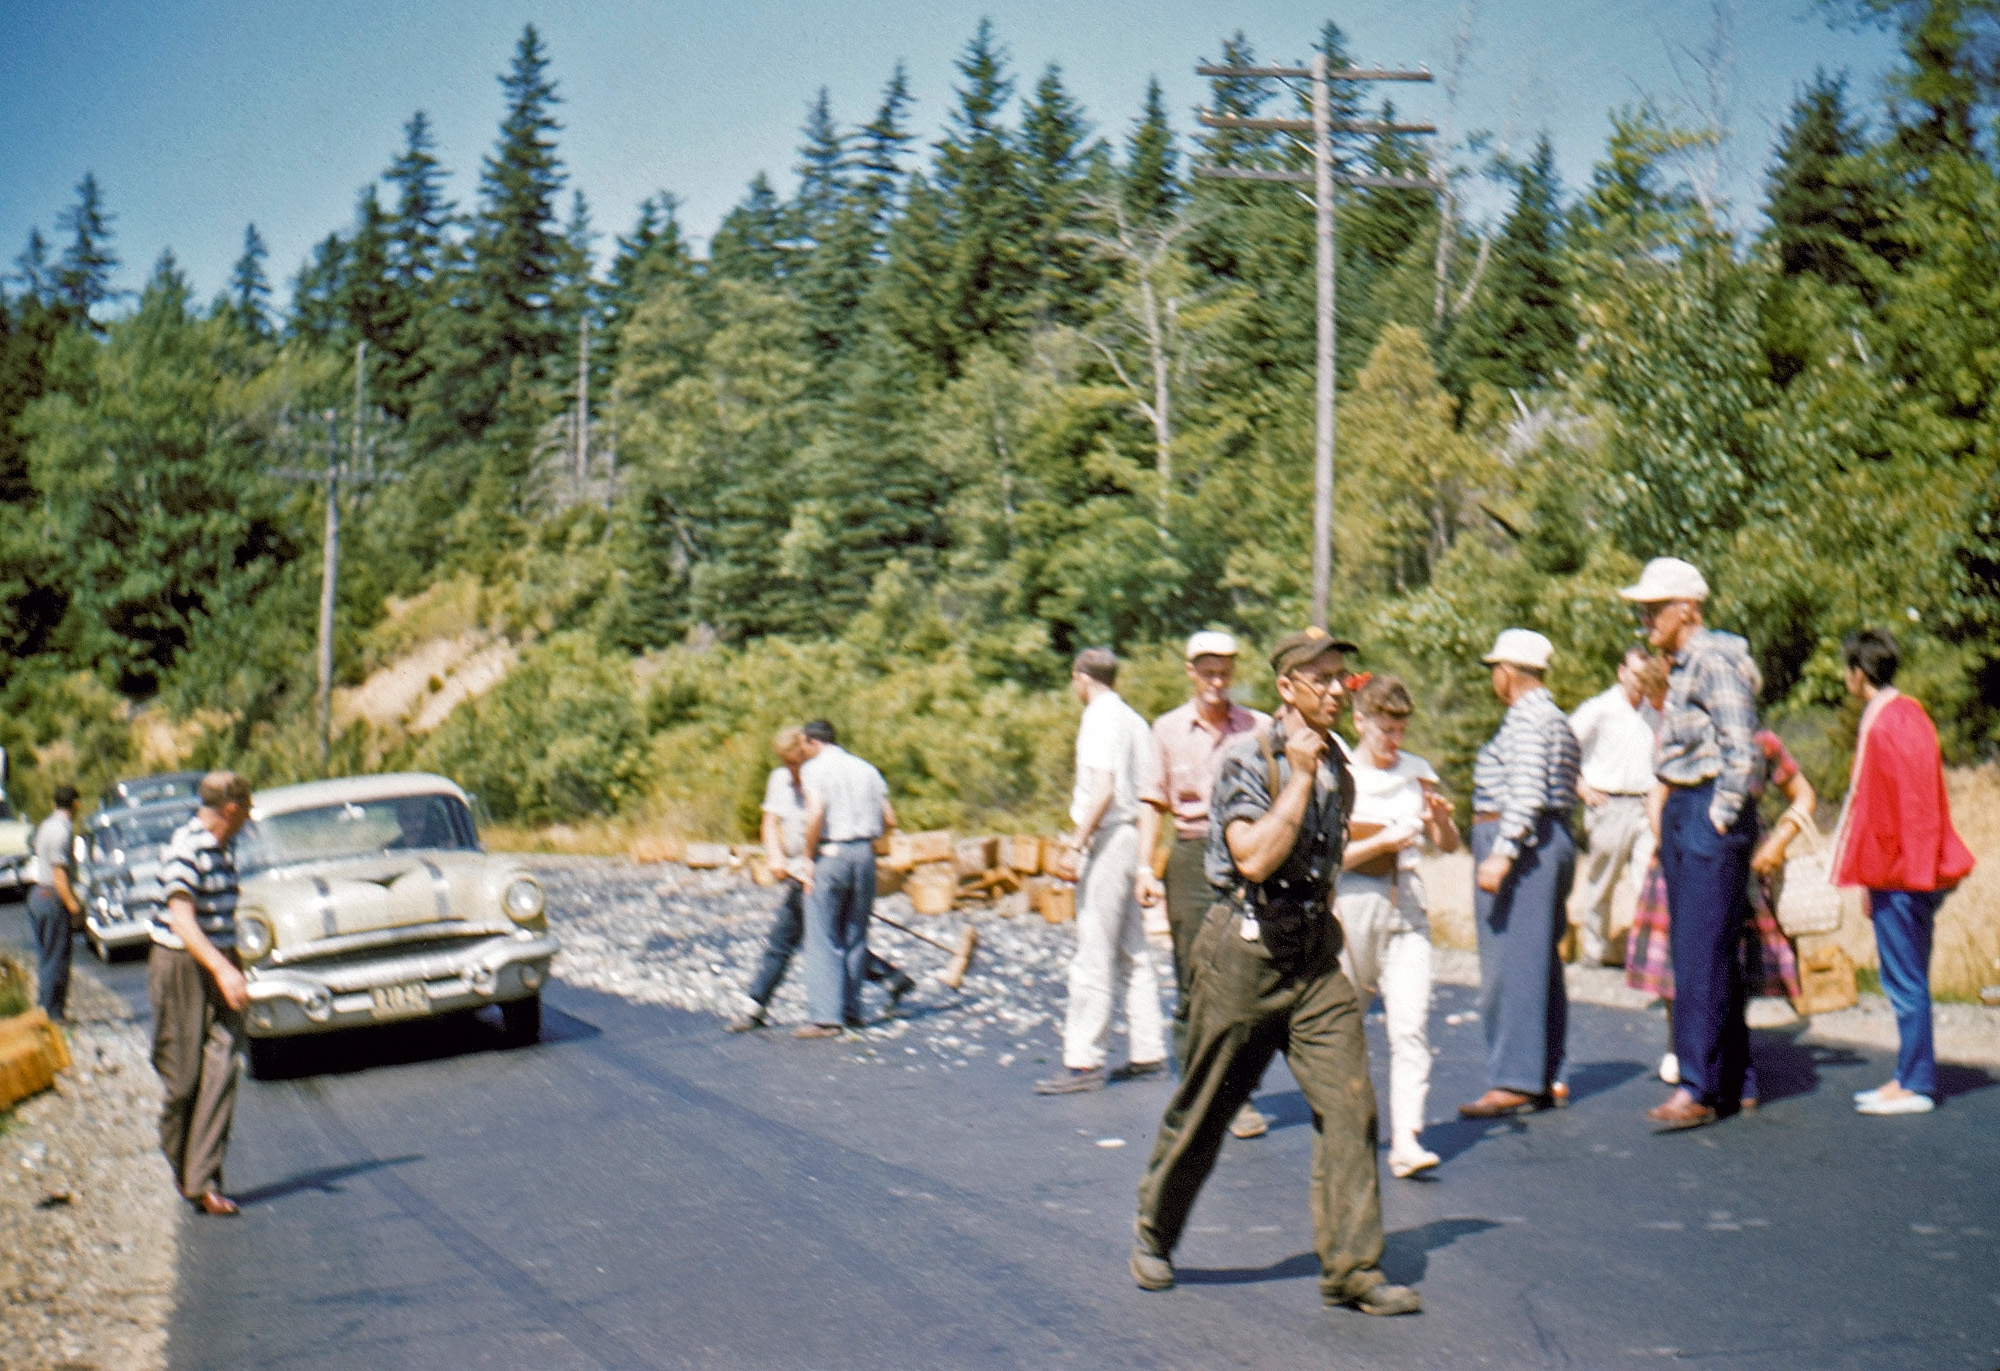 Taken 1958 in Maine. Can't quite tell if this is routine construction, a transit spill, or some kind of rockslide. View full size.